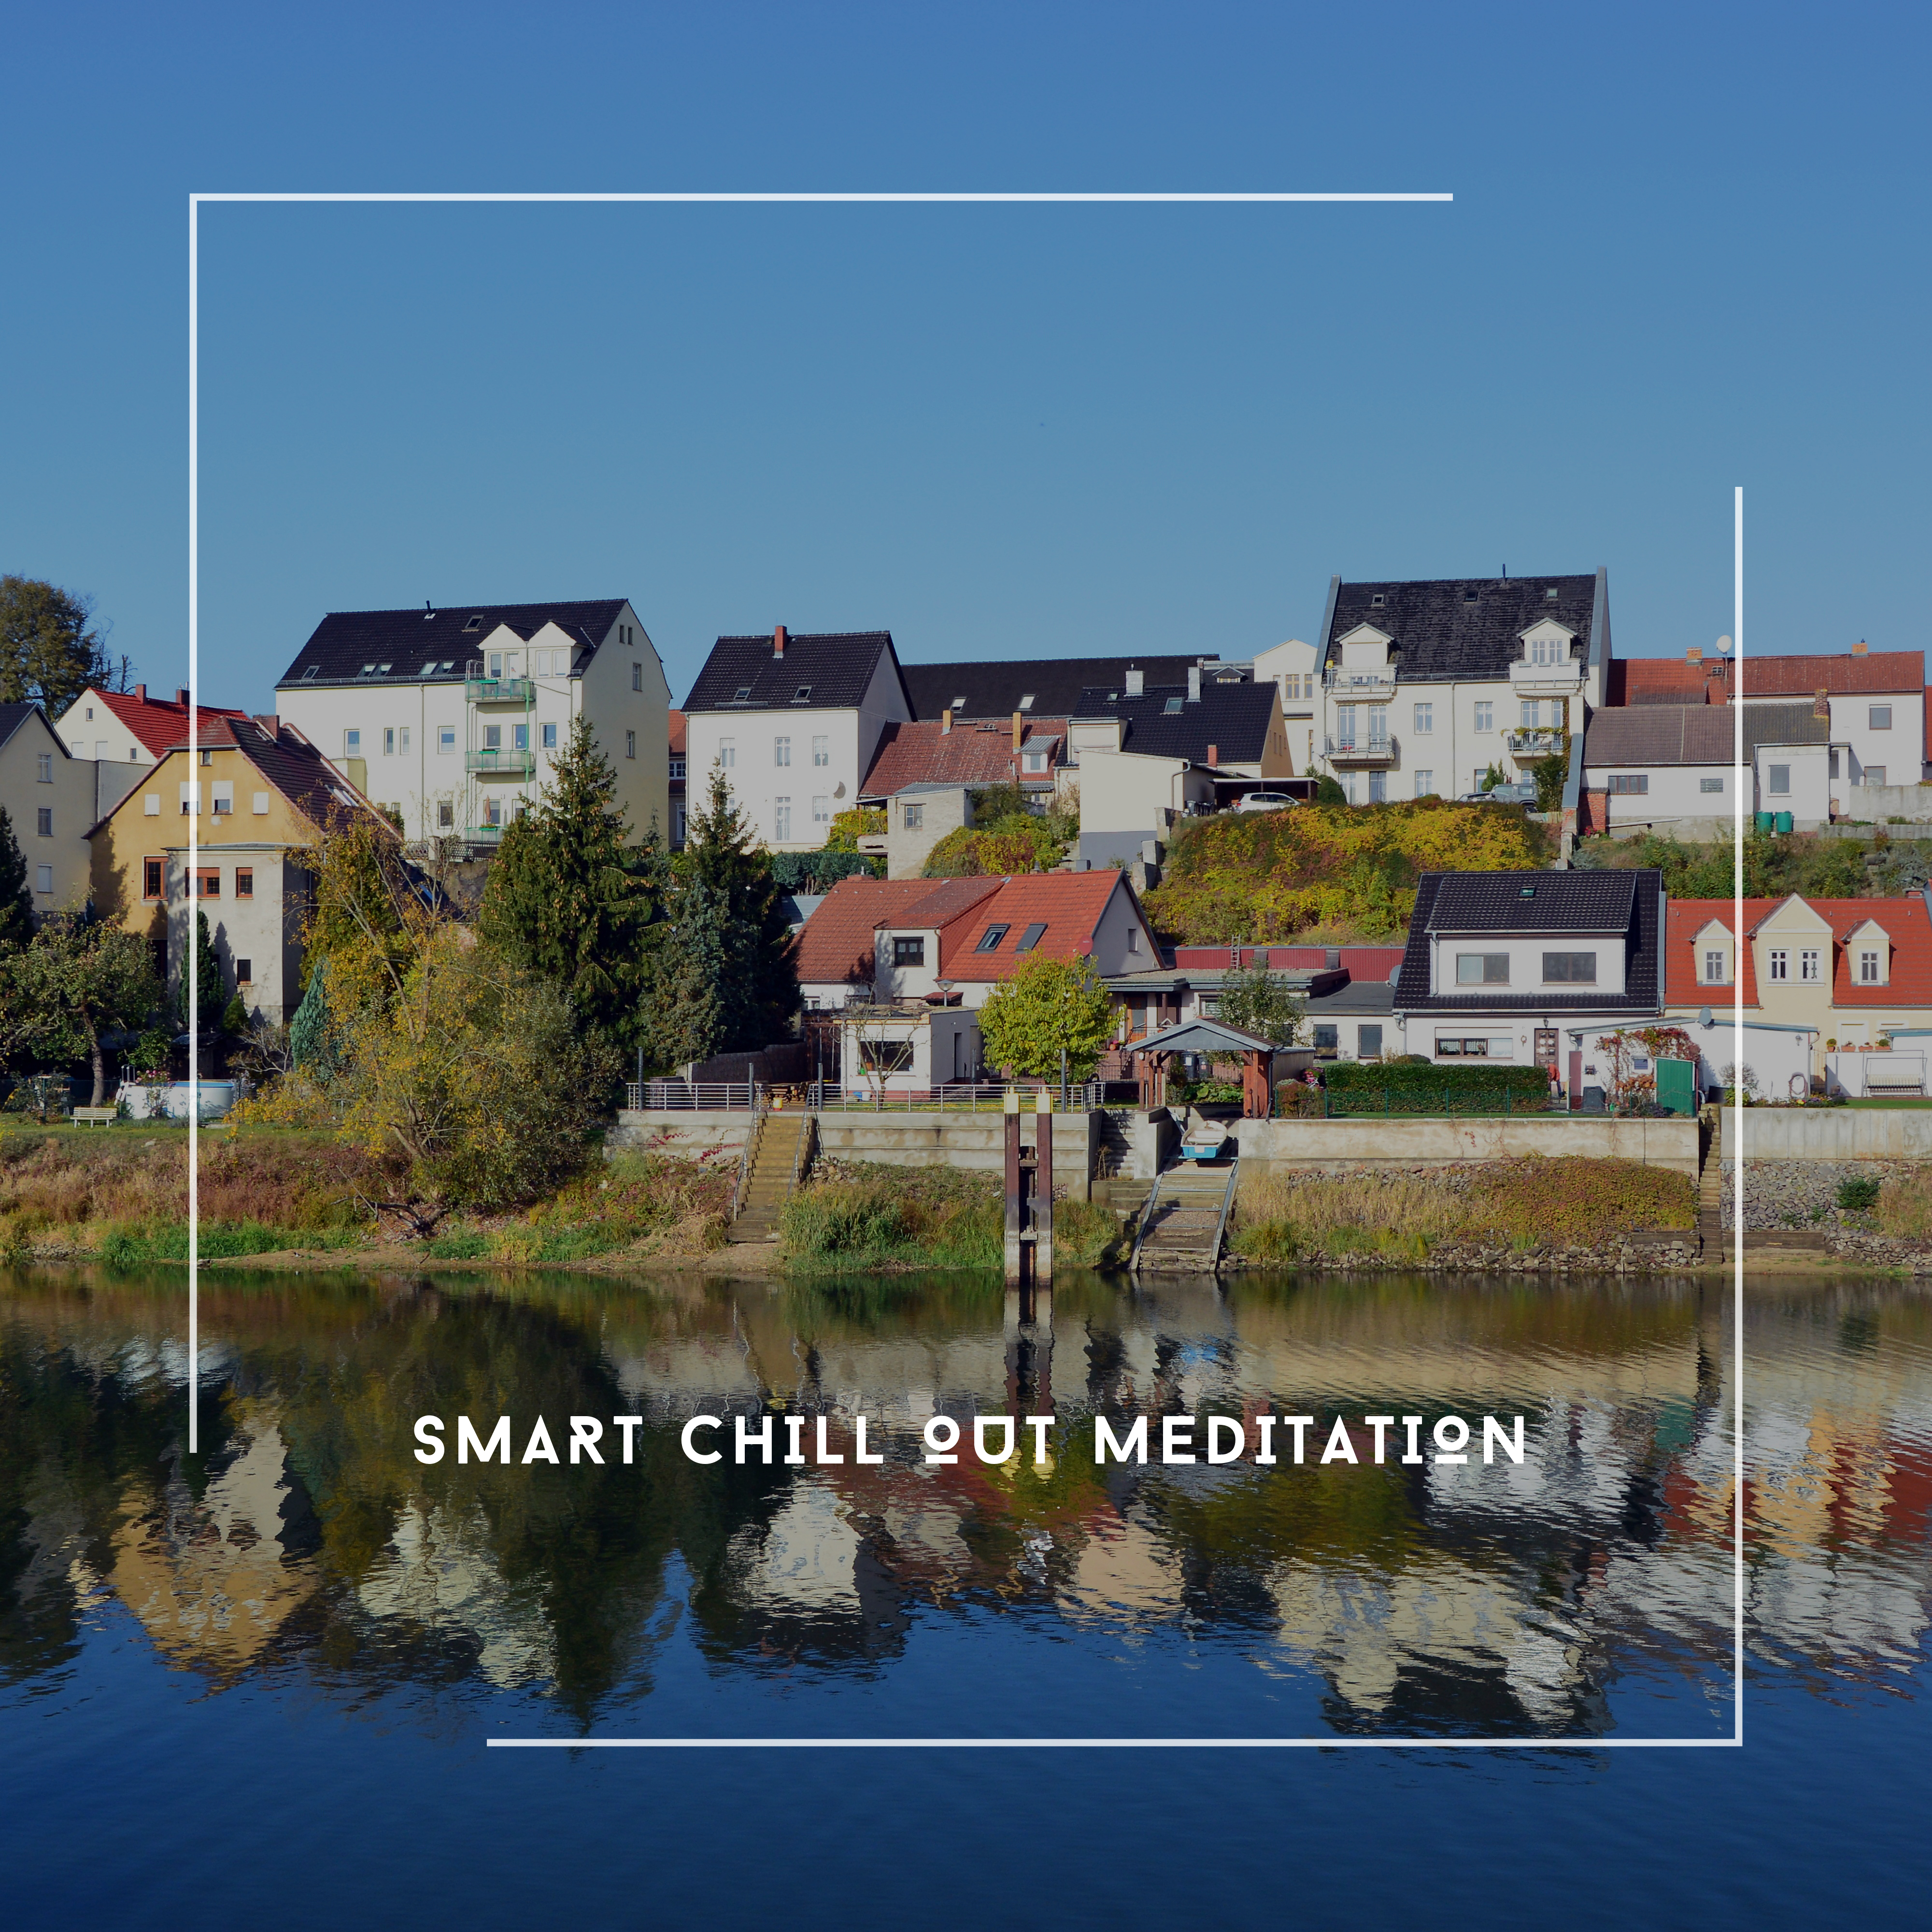 Smart Chill Out Meditation